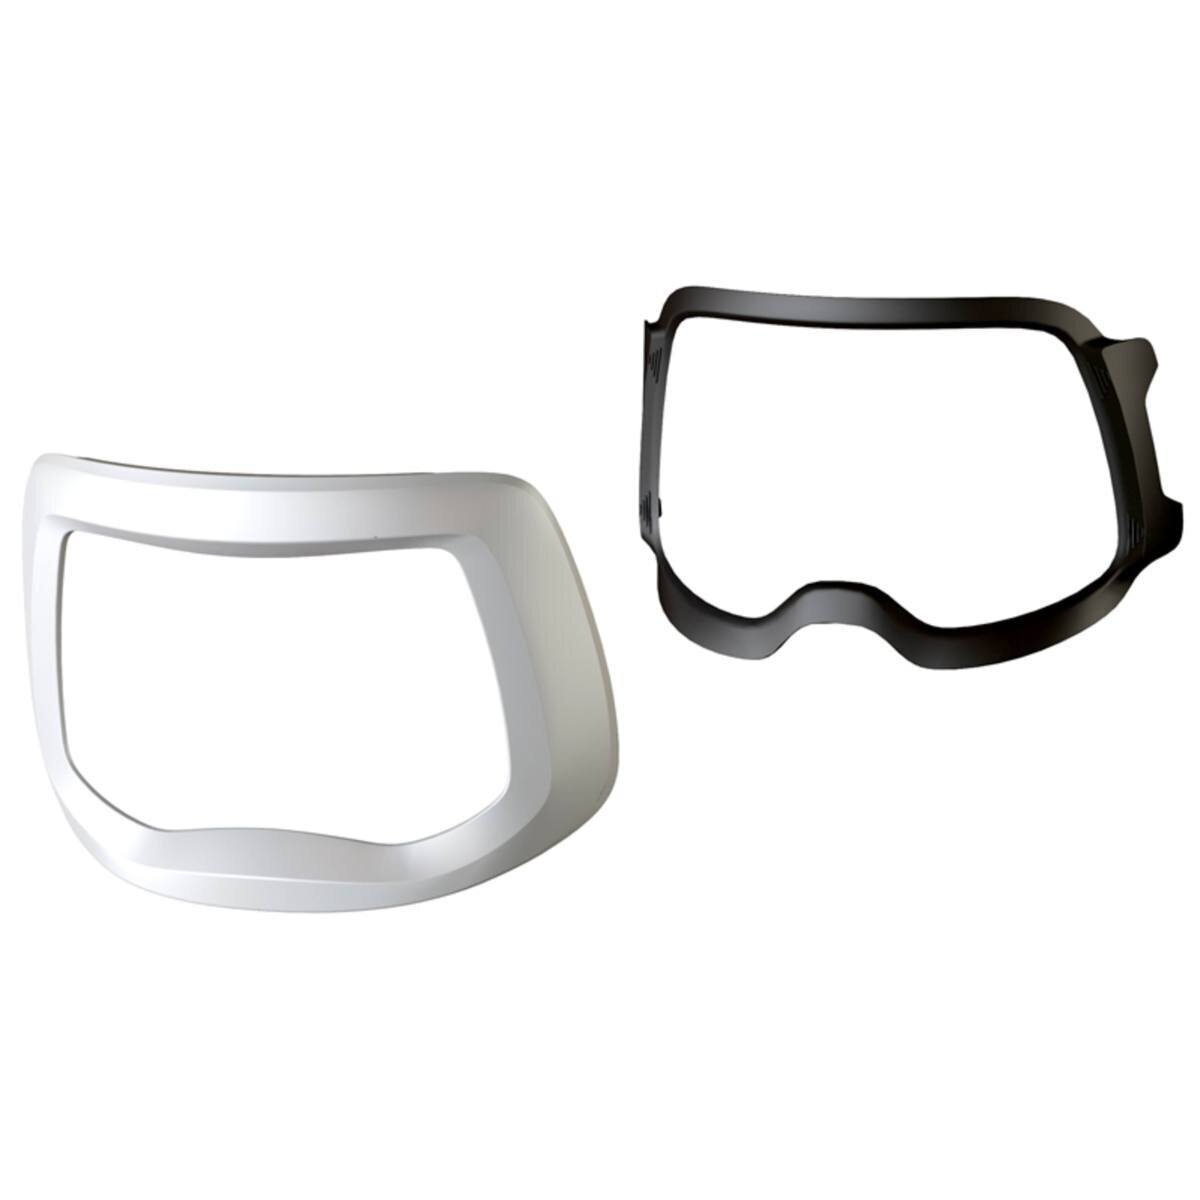 3M Speedglas front cover (two-piece) #540500